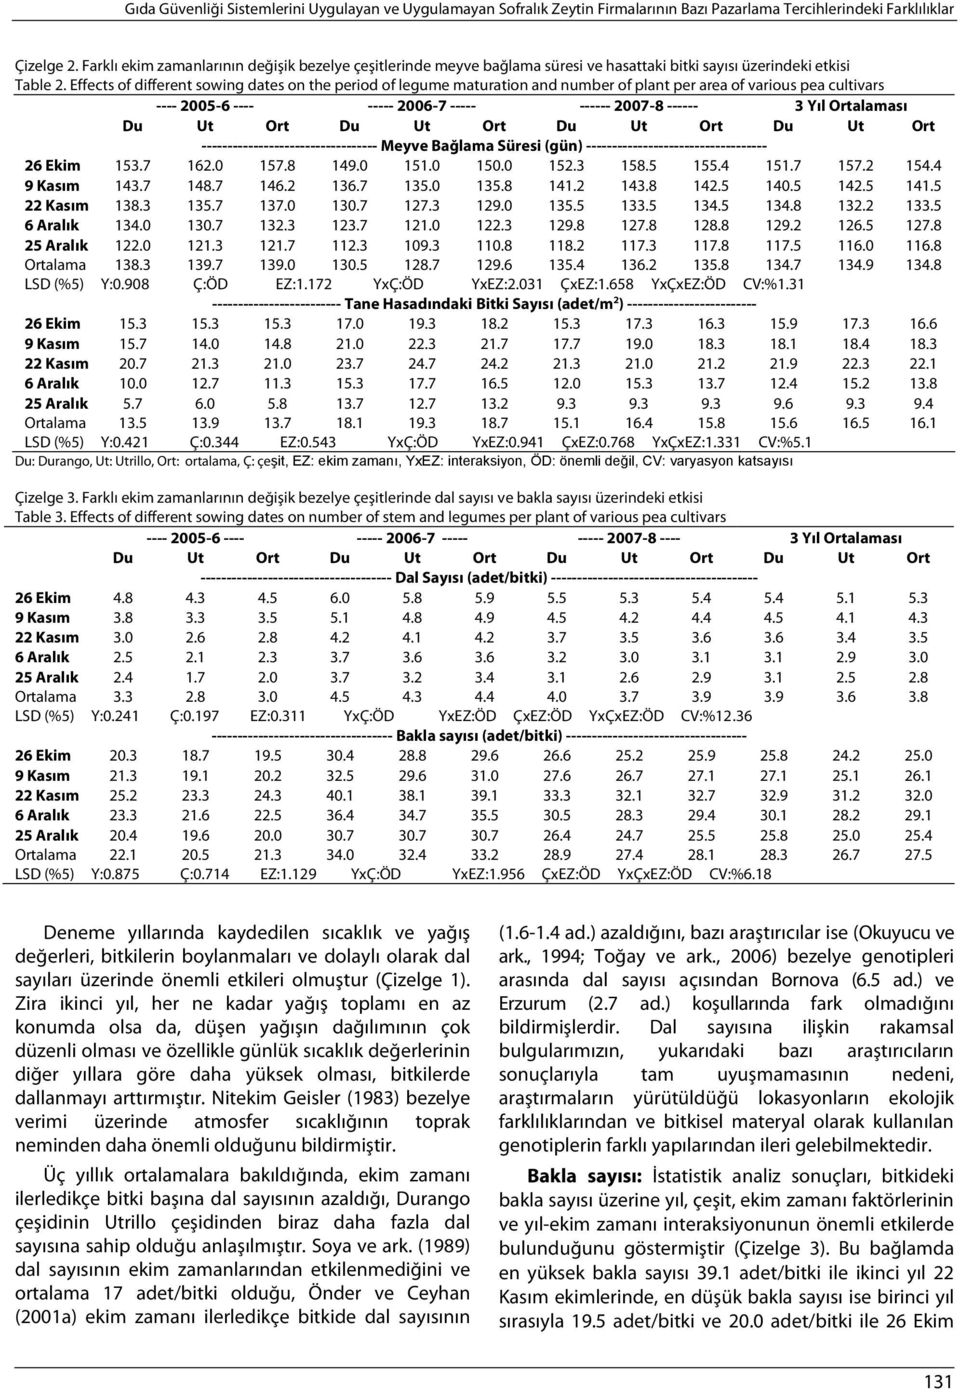 Effects of different sowing dates on the period of legume maturation and number of plant per area of various pea cultivars ---- 2005-6 ---- ----- 2006-7 ----- ------ 2007-8 ------ 3 Yıl Ortalaması Du